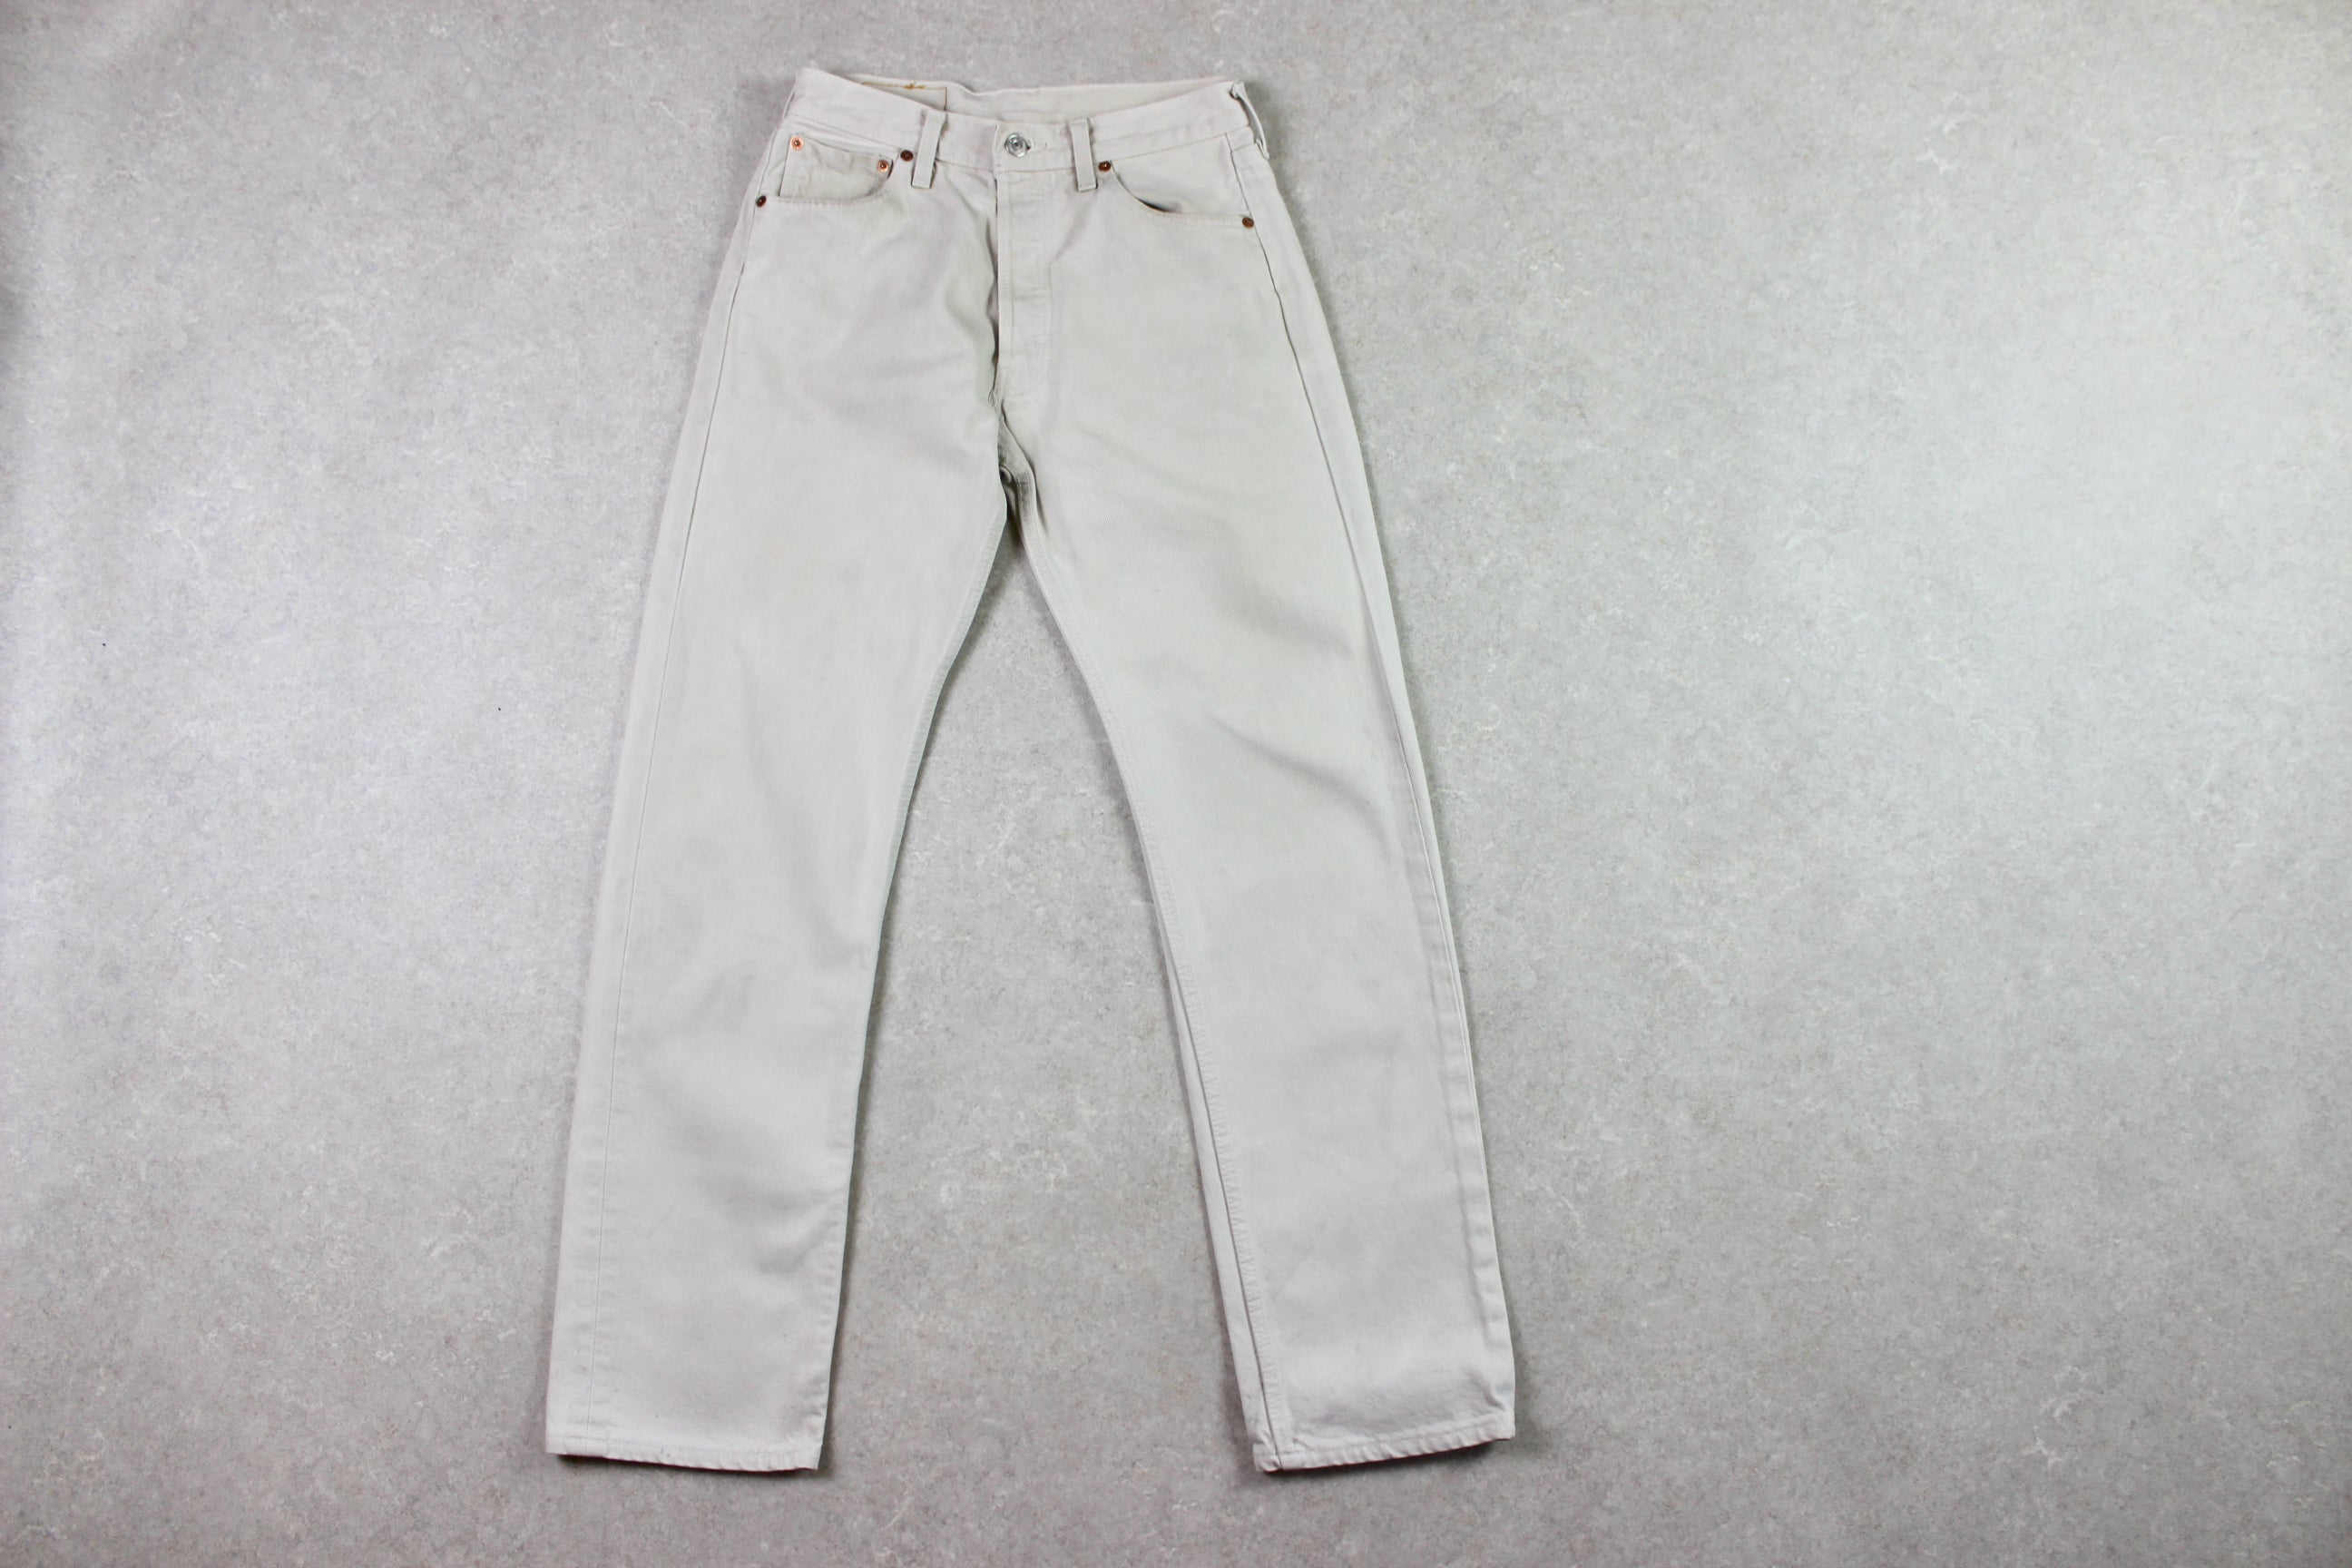 Levi's - 501 Jeans Made in UK - Beige - 30/32